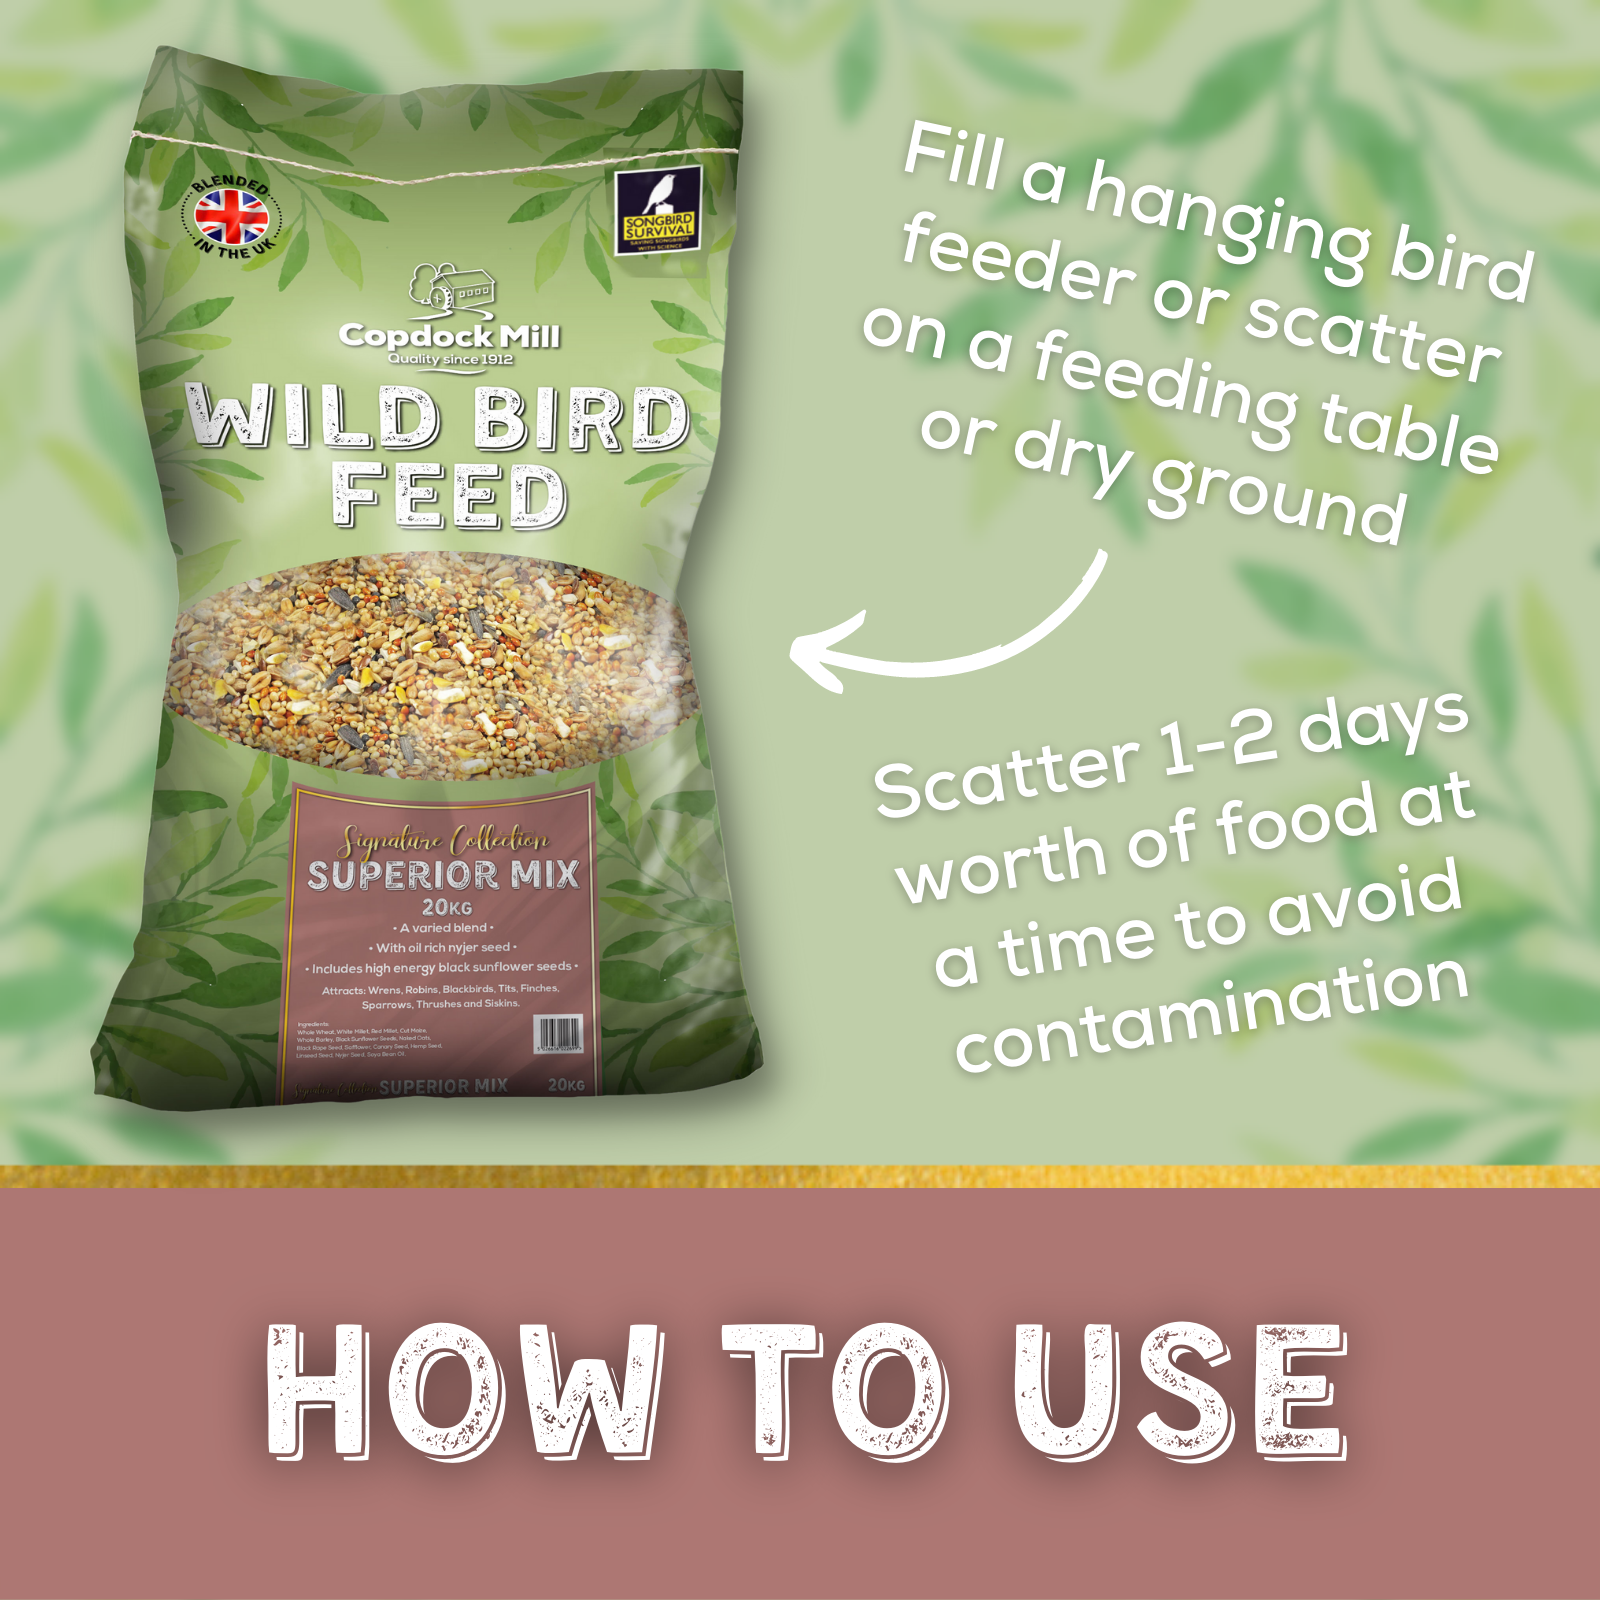 How to Use: Fill a hanging bird feeder or scatter on a feeding table or dry ground. Scatter 1-2 days worth of food at a time to avoid contamination.